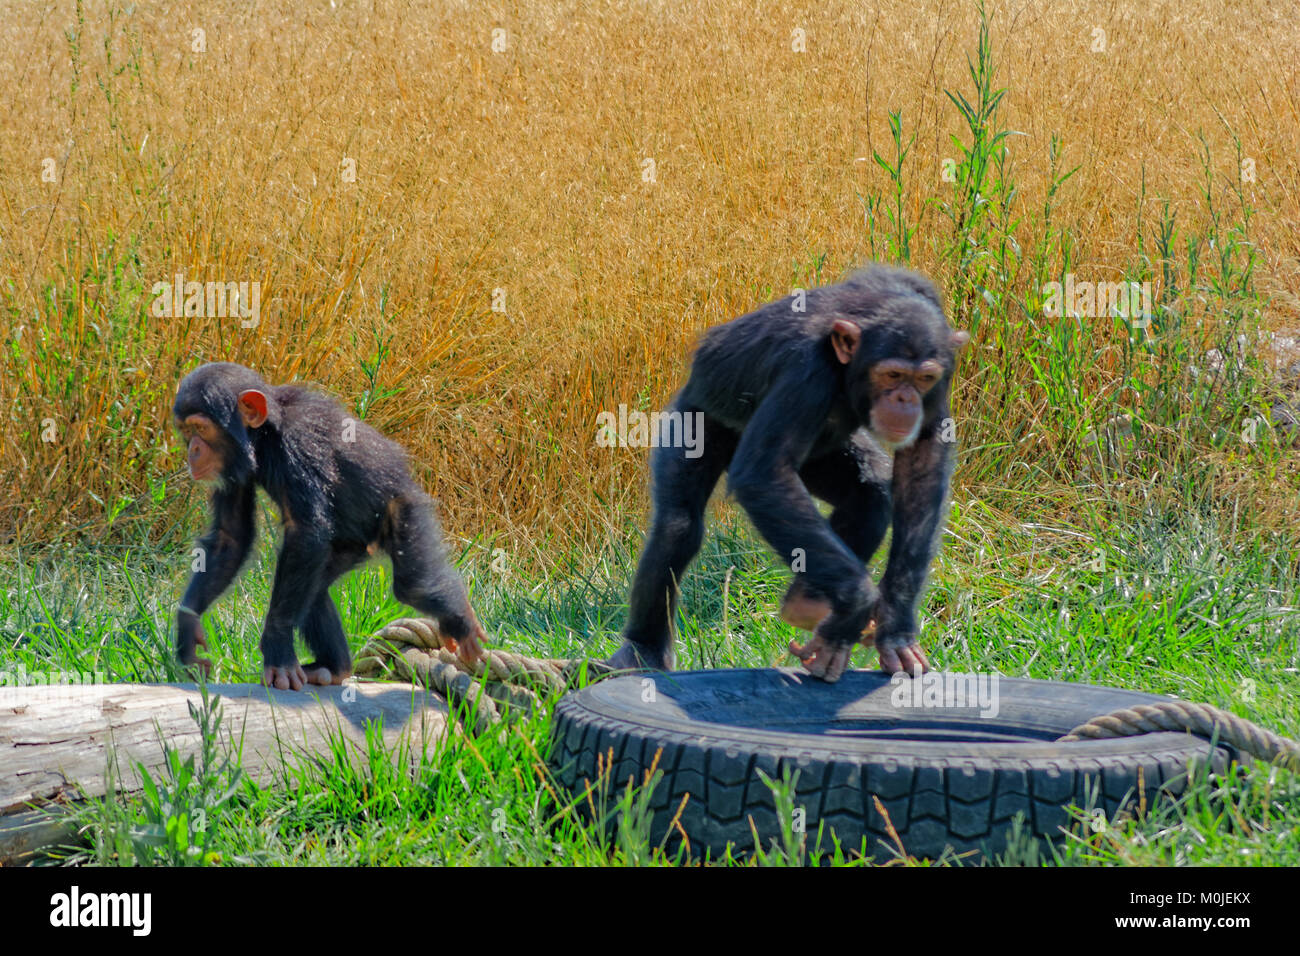 Chimpanzees heading to different directions Stock Photo